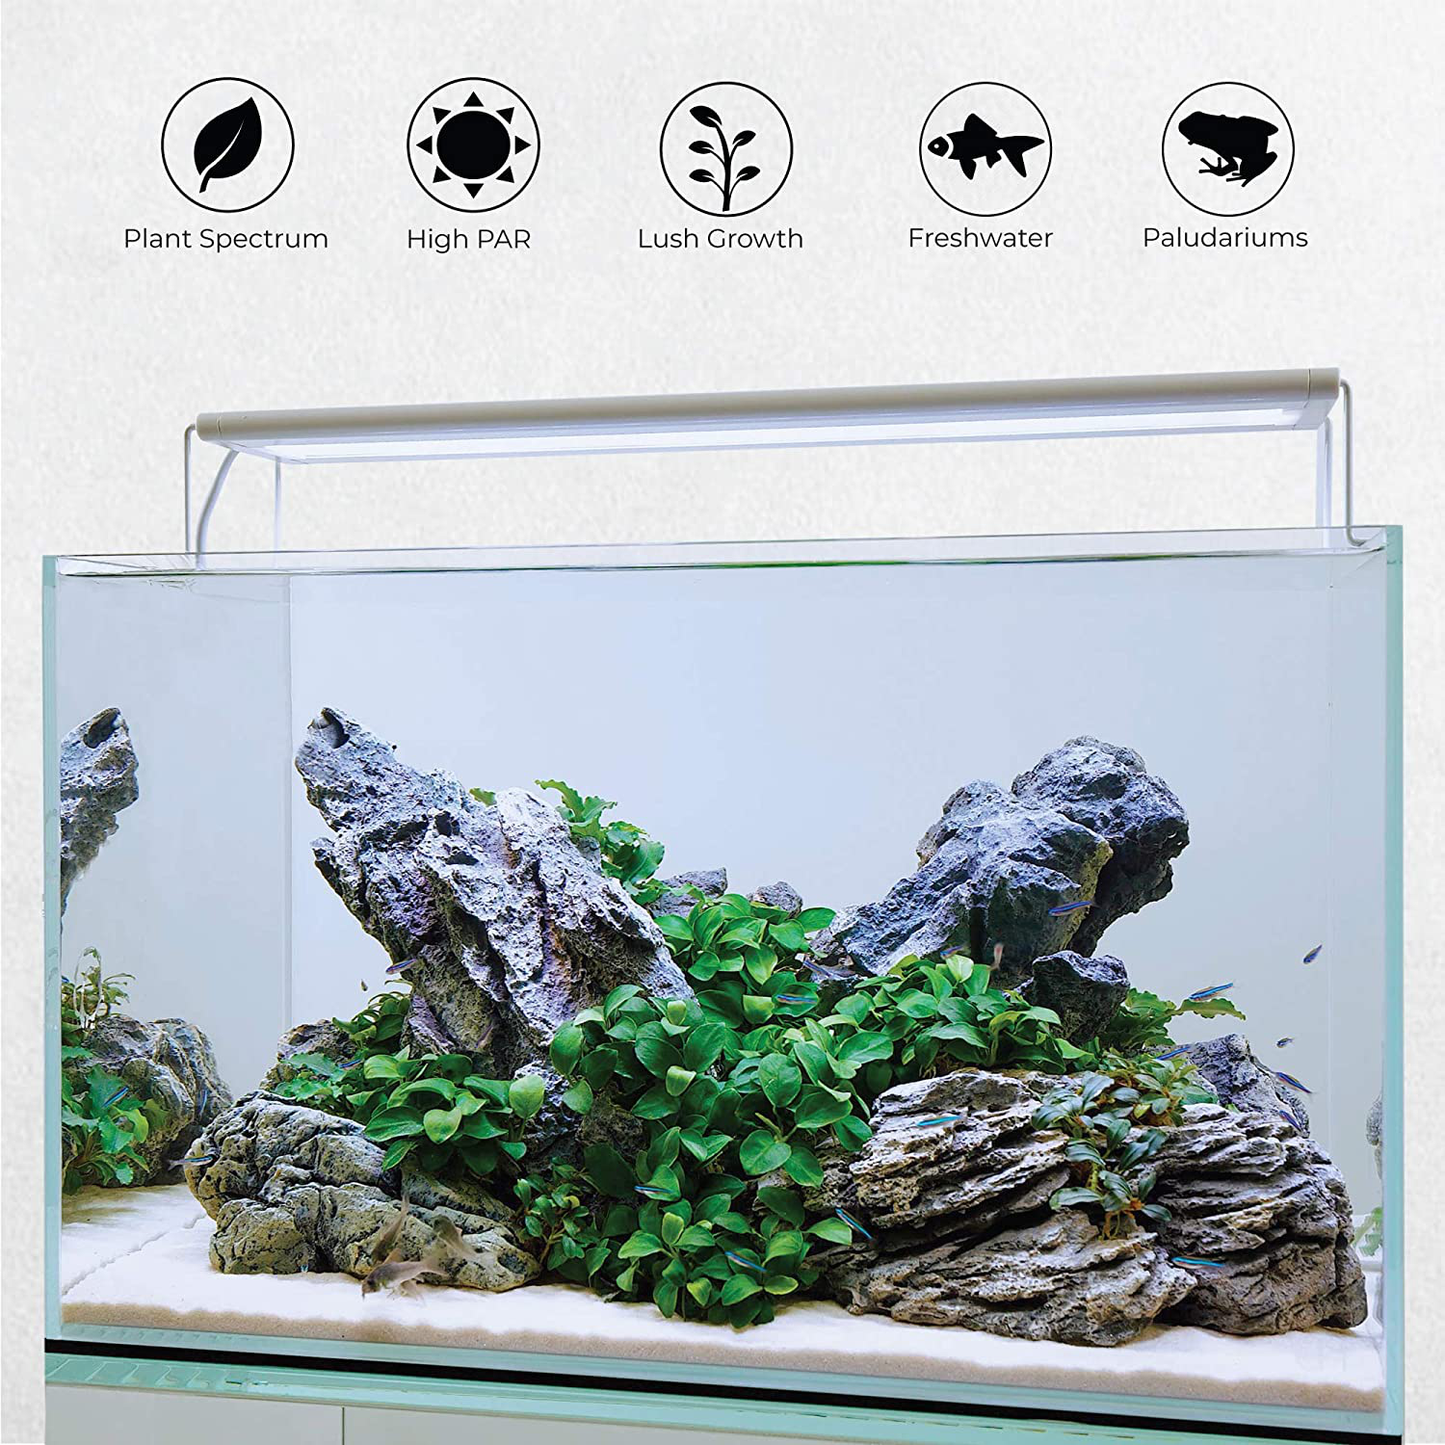 CURRENT USA Serenesun LE PRO Freshwater Plant Aquarium LED Light with 24 Hour Timer Control | High Output Full Spectrum with 460Nm Red | Wireless Remote | Tall Fish Tank Brackets